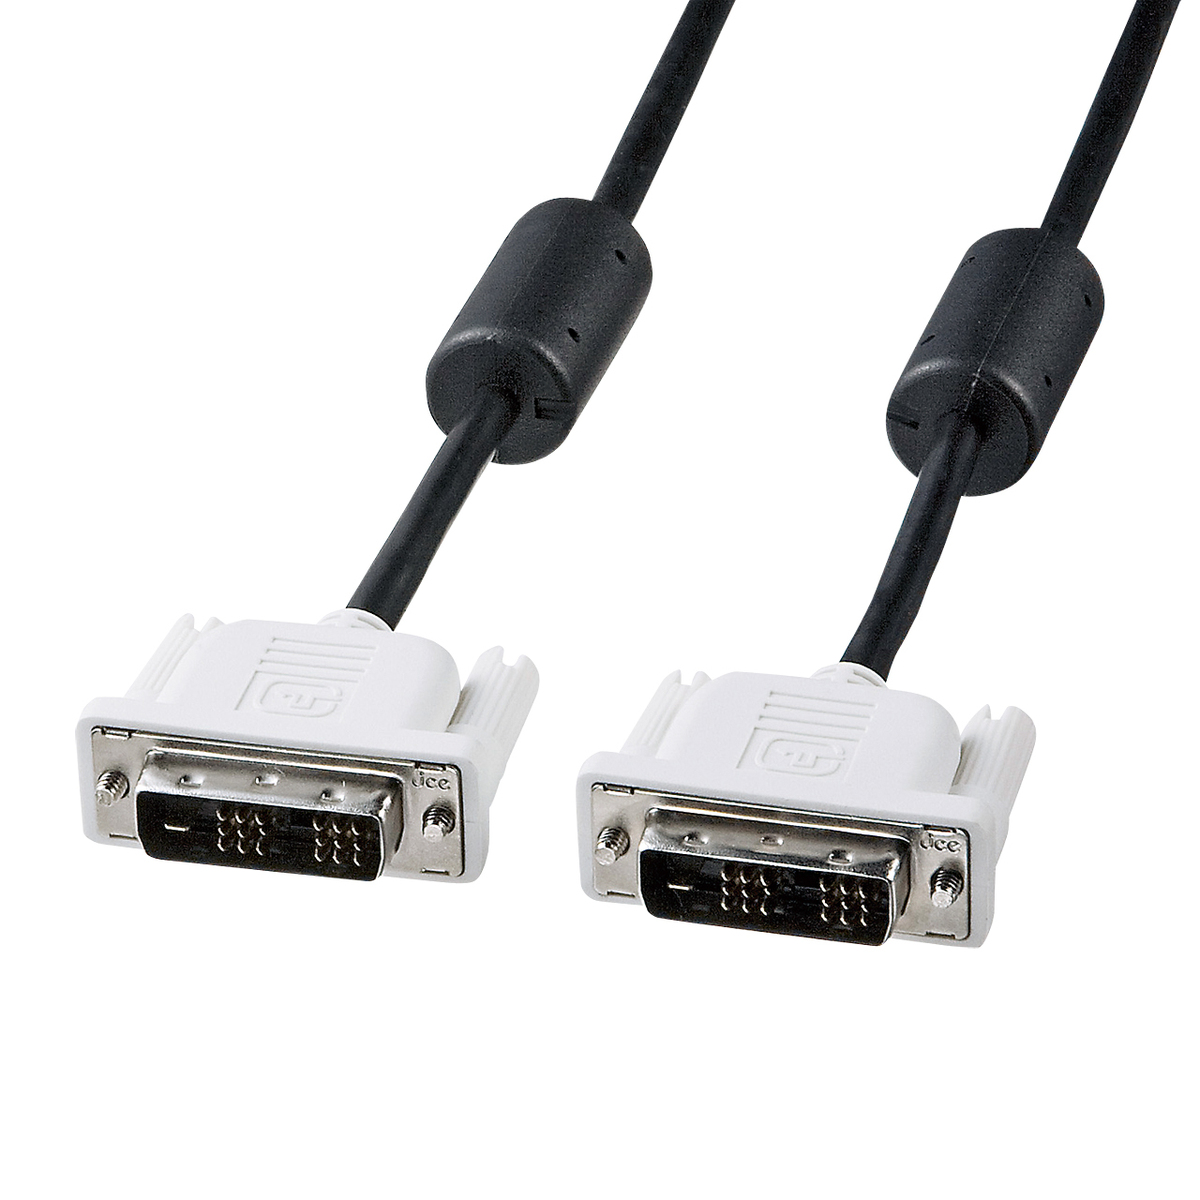 Display Cables - DVI, Single Link